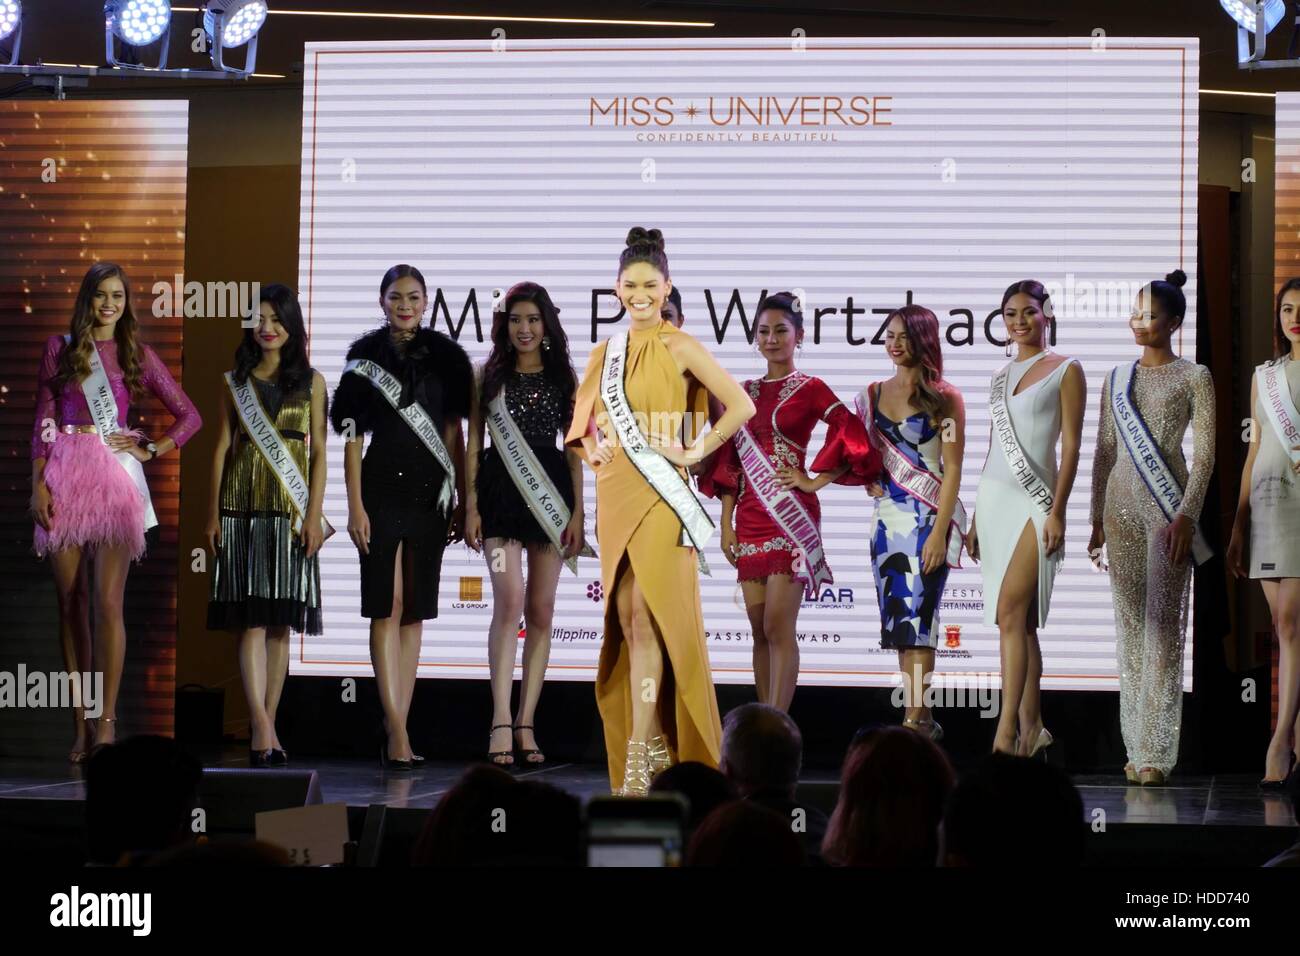 Pia Wurtzbach is presenting herself and the 10 Miss Universe Candidates that came from (L - R) Australia, Japan, Indonesia, Korea, Malaysia, Myanmar, New Zealand, Philippines, Thailand, Vietnam and USA. Miss Universe officially started in the Philippines with its Kick-off Party at S Maison Mall, Conrad Hotel, SM Mall of Asia, Pasay City at 7:00pm. Presented with Pia Wurtzbach, reigning Miss Universe, candidates from Australia, Japan, Indonesia, Korea, Malaysia, Myanmar, New Zealand, Philippines, Thailand, Vietnam and USA. (Photo by George Buid/Pacific Press) Stock Photo